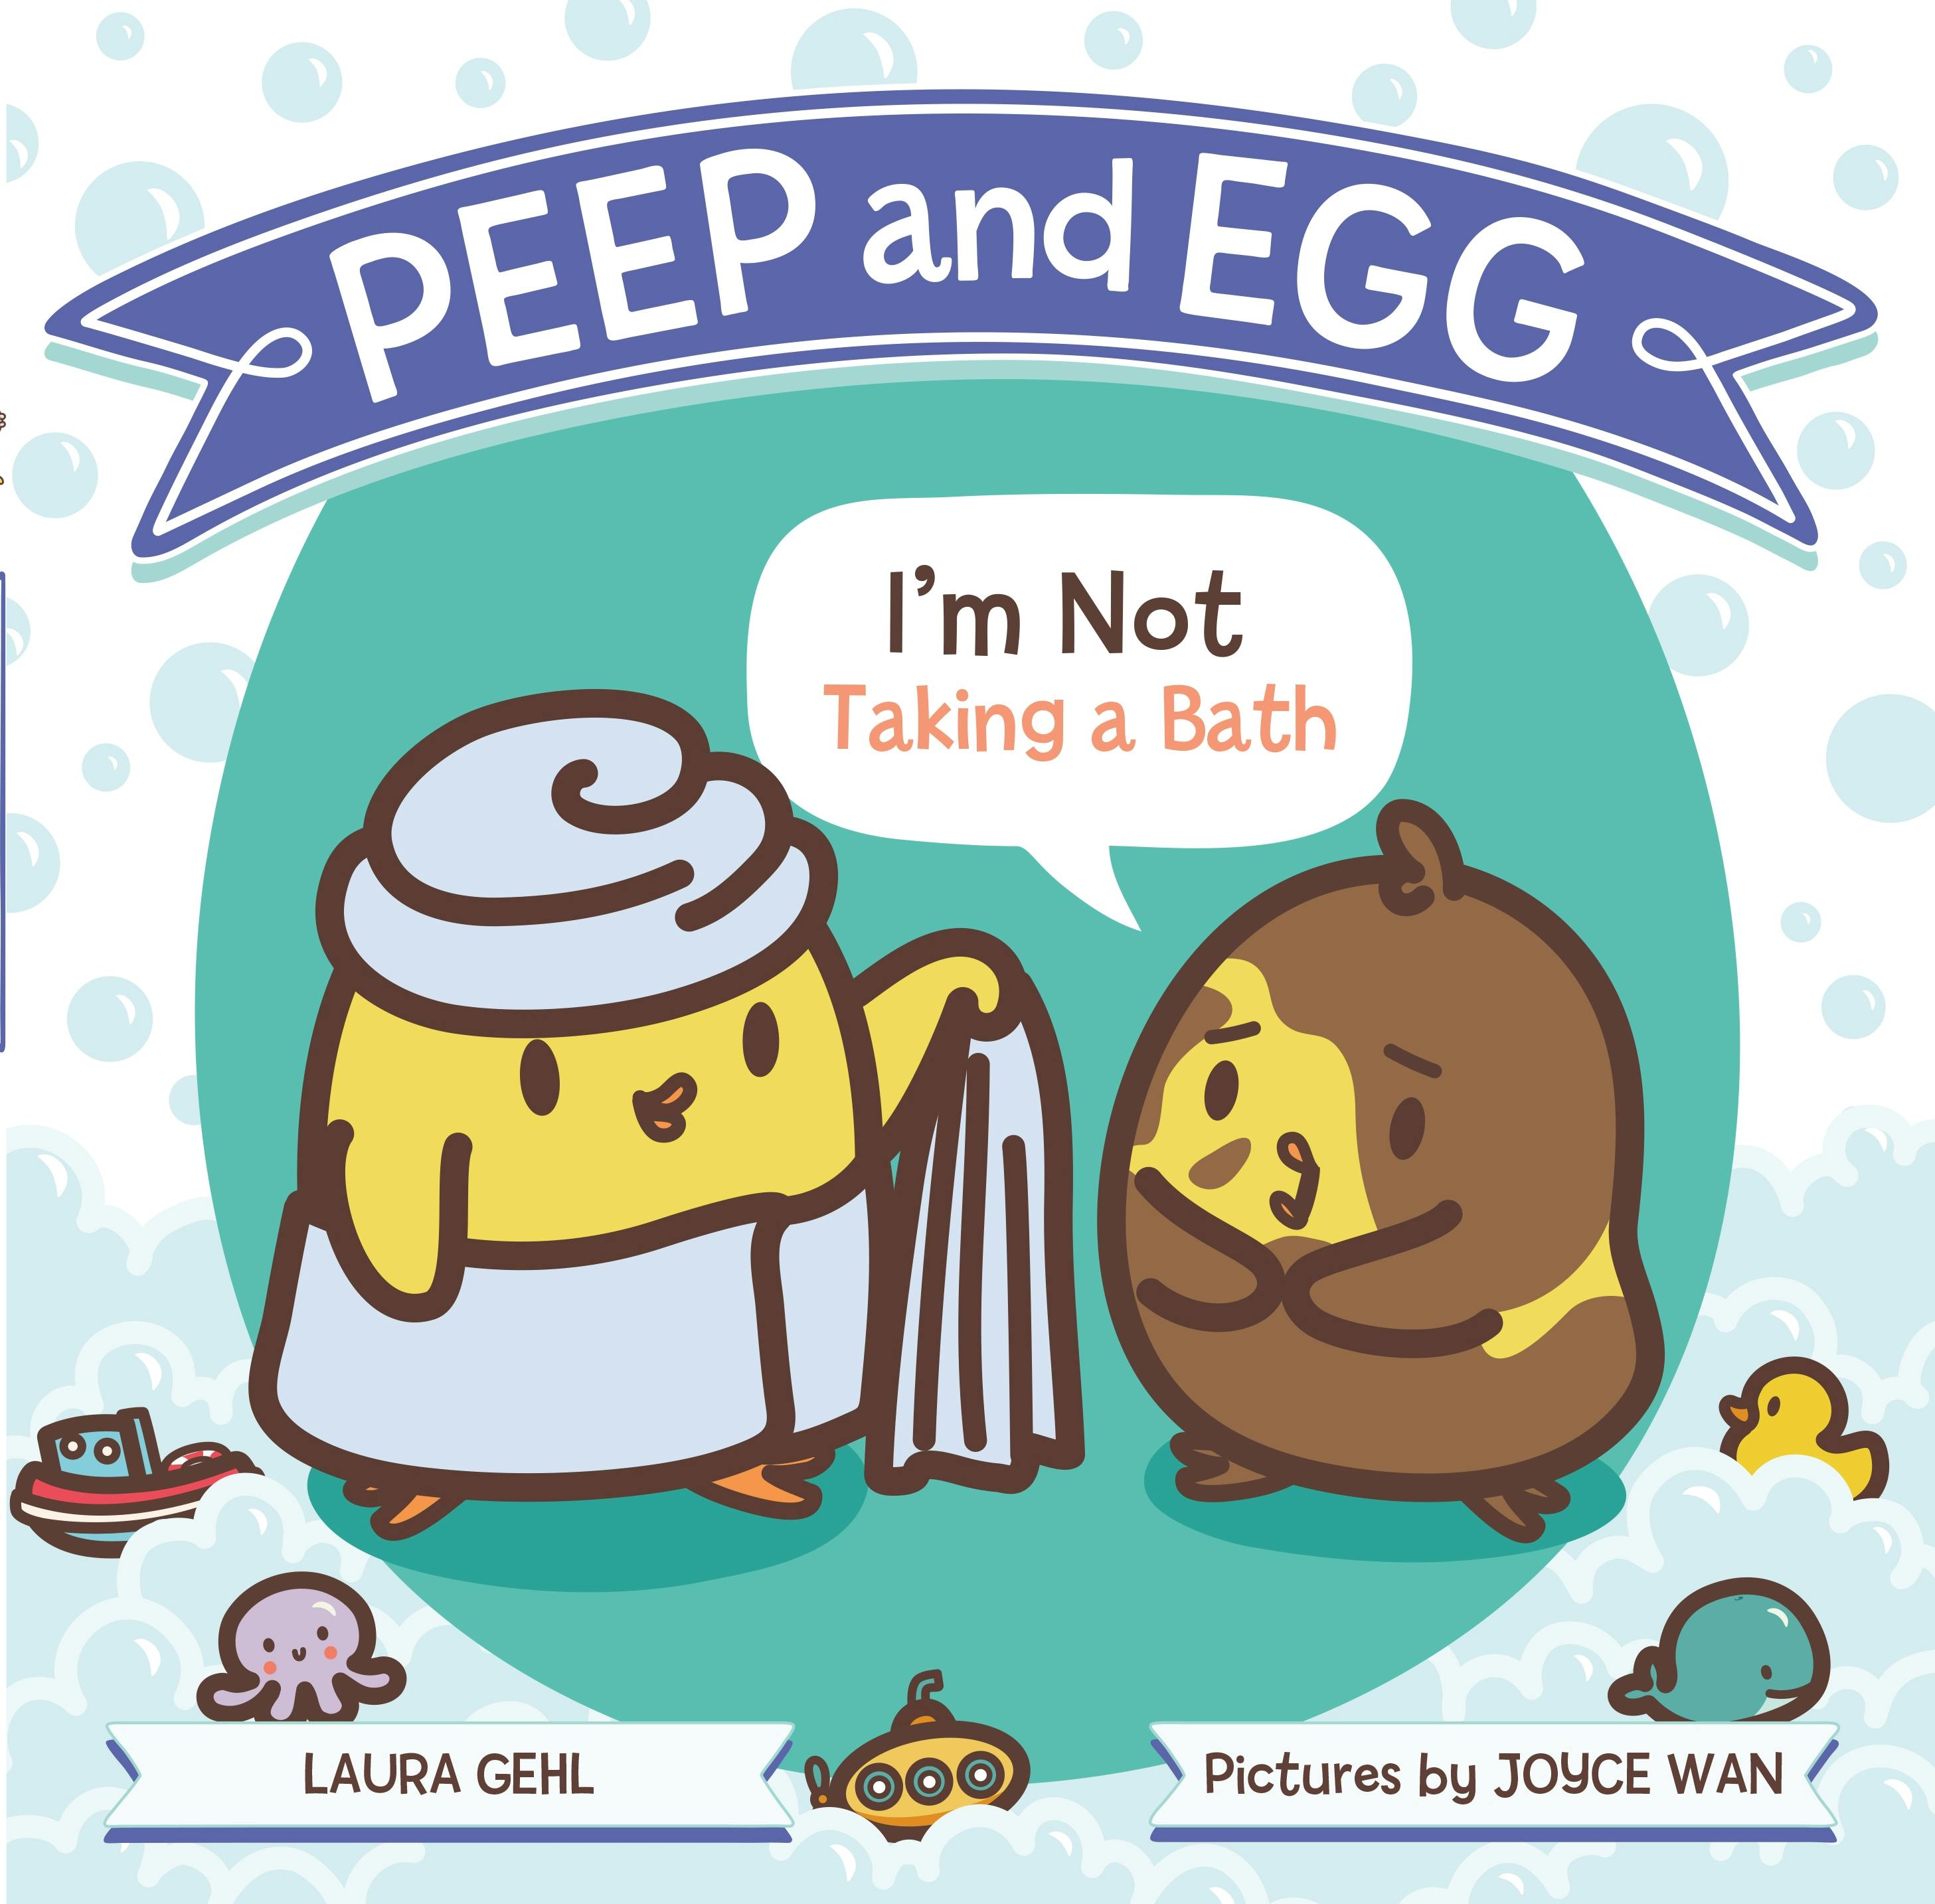 Image of Peep and Egg: I'm Not Taking a Bath